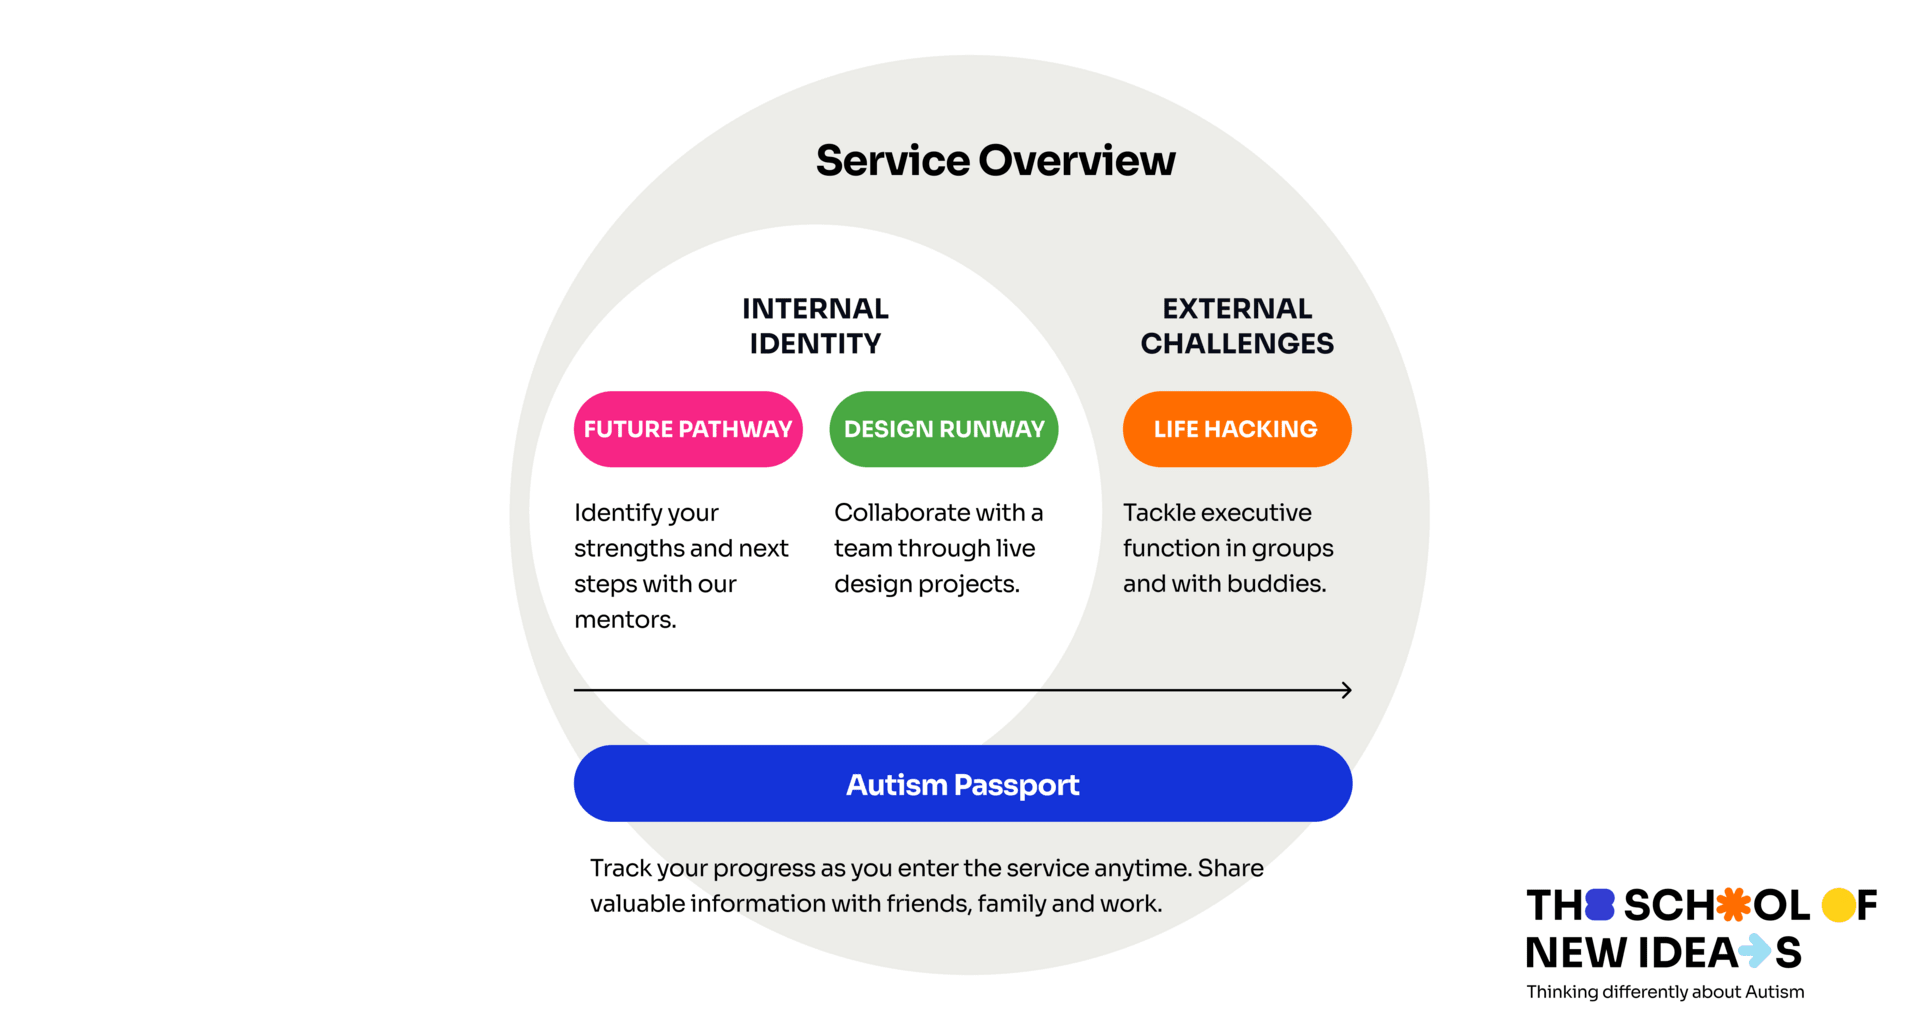 Service Overview